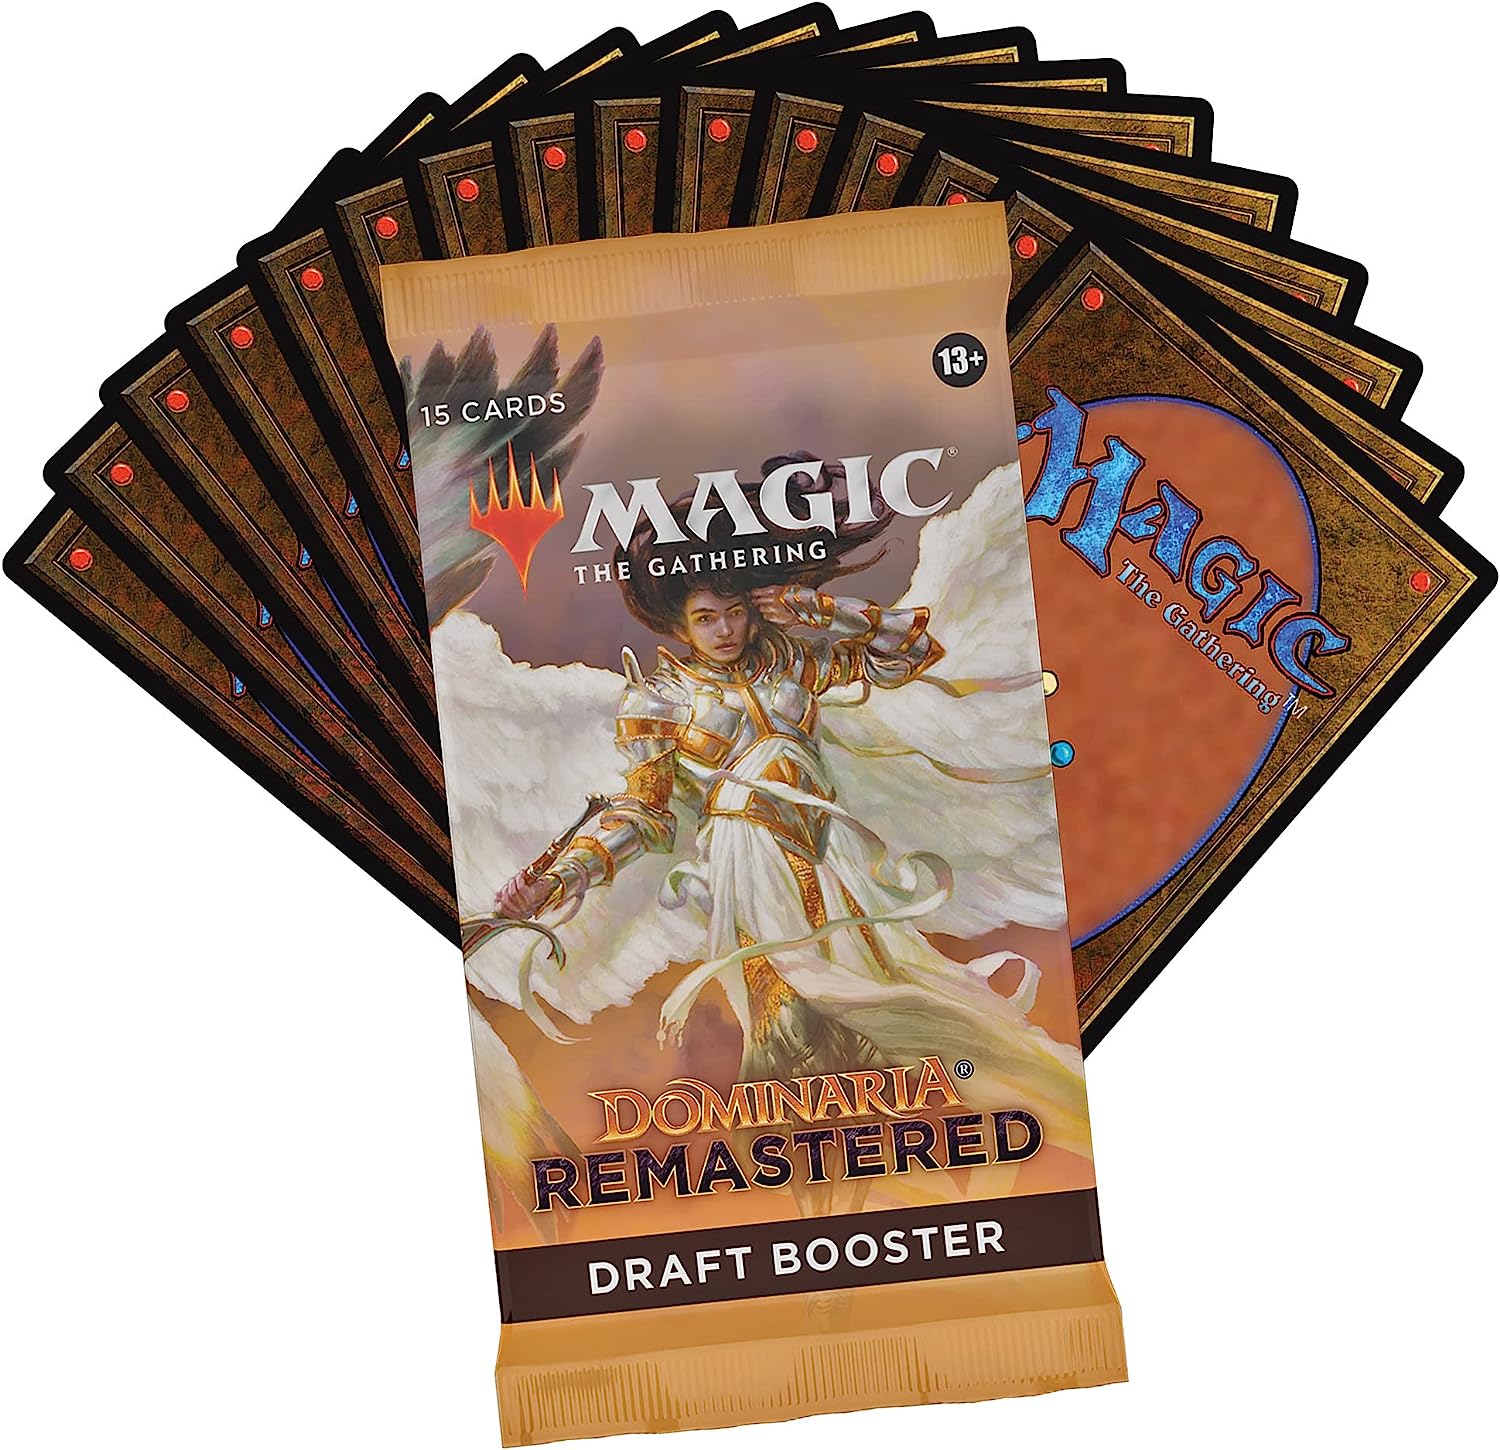 MAGIC THE GATHERING DOMINARIA REMASTERED DRAFT BOOSTER PACK